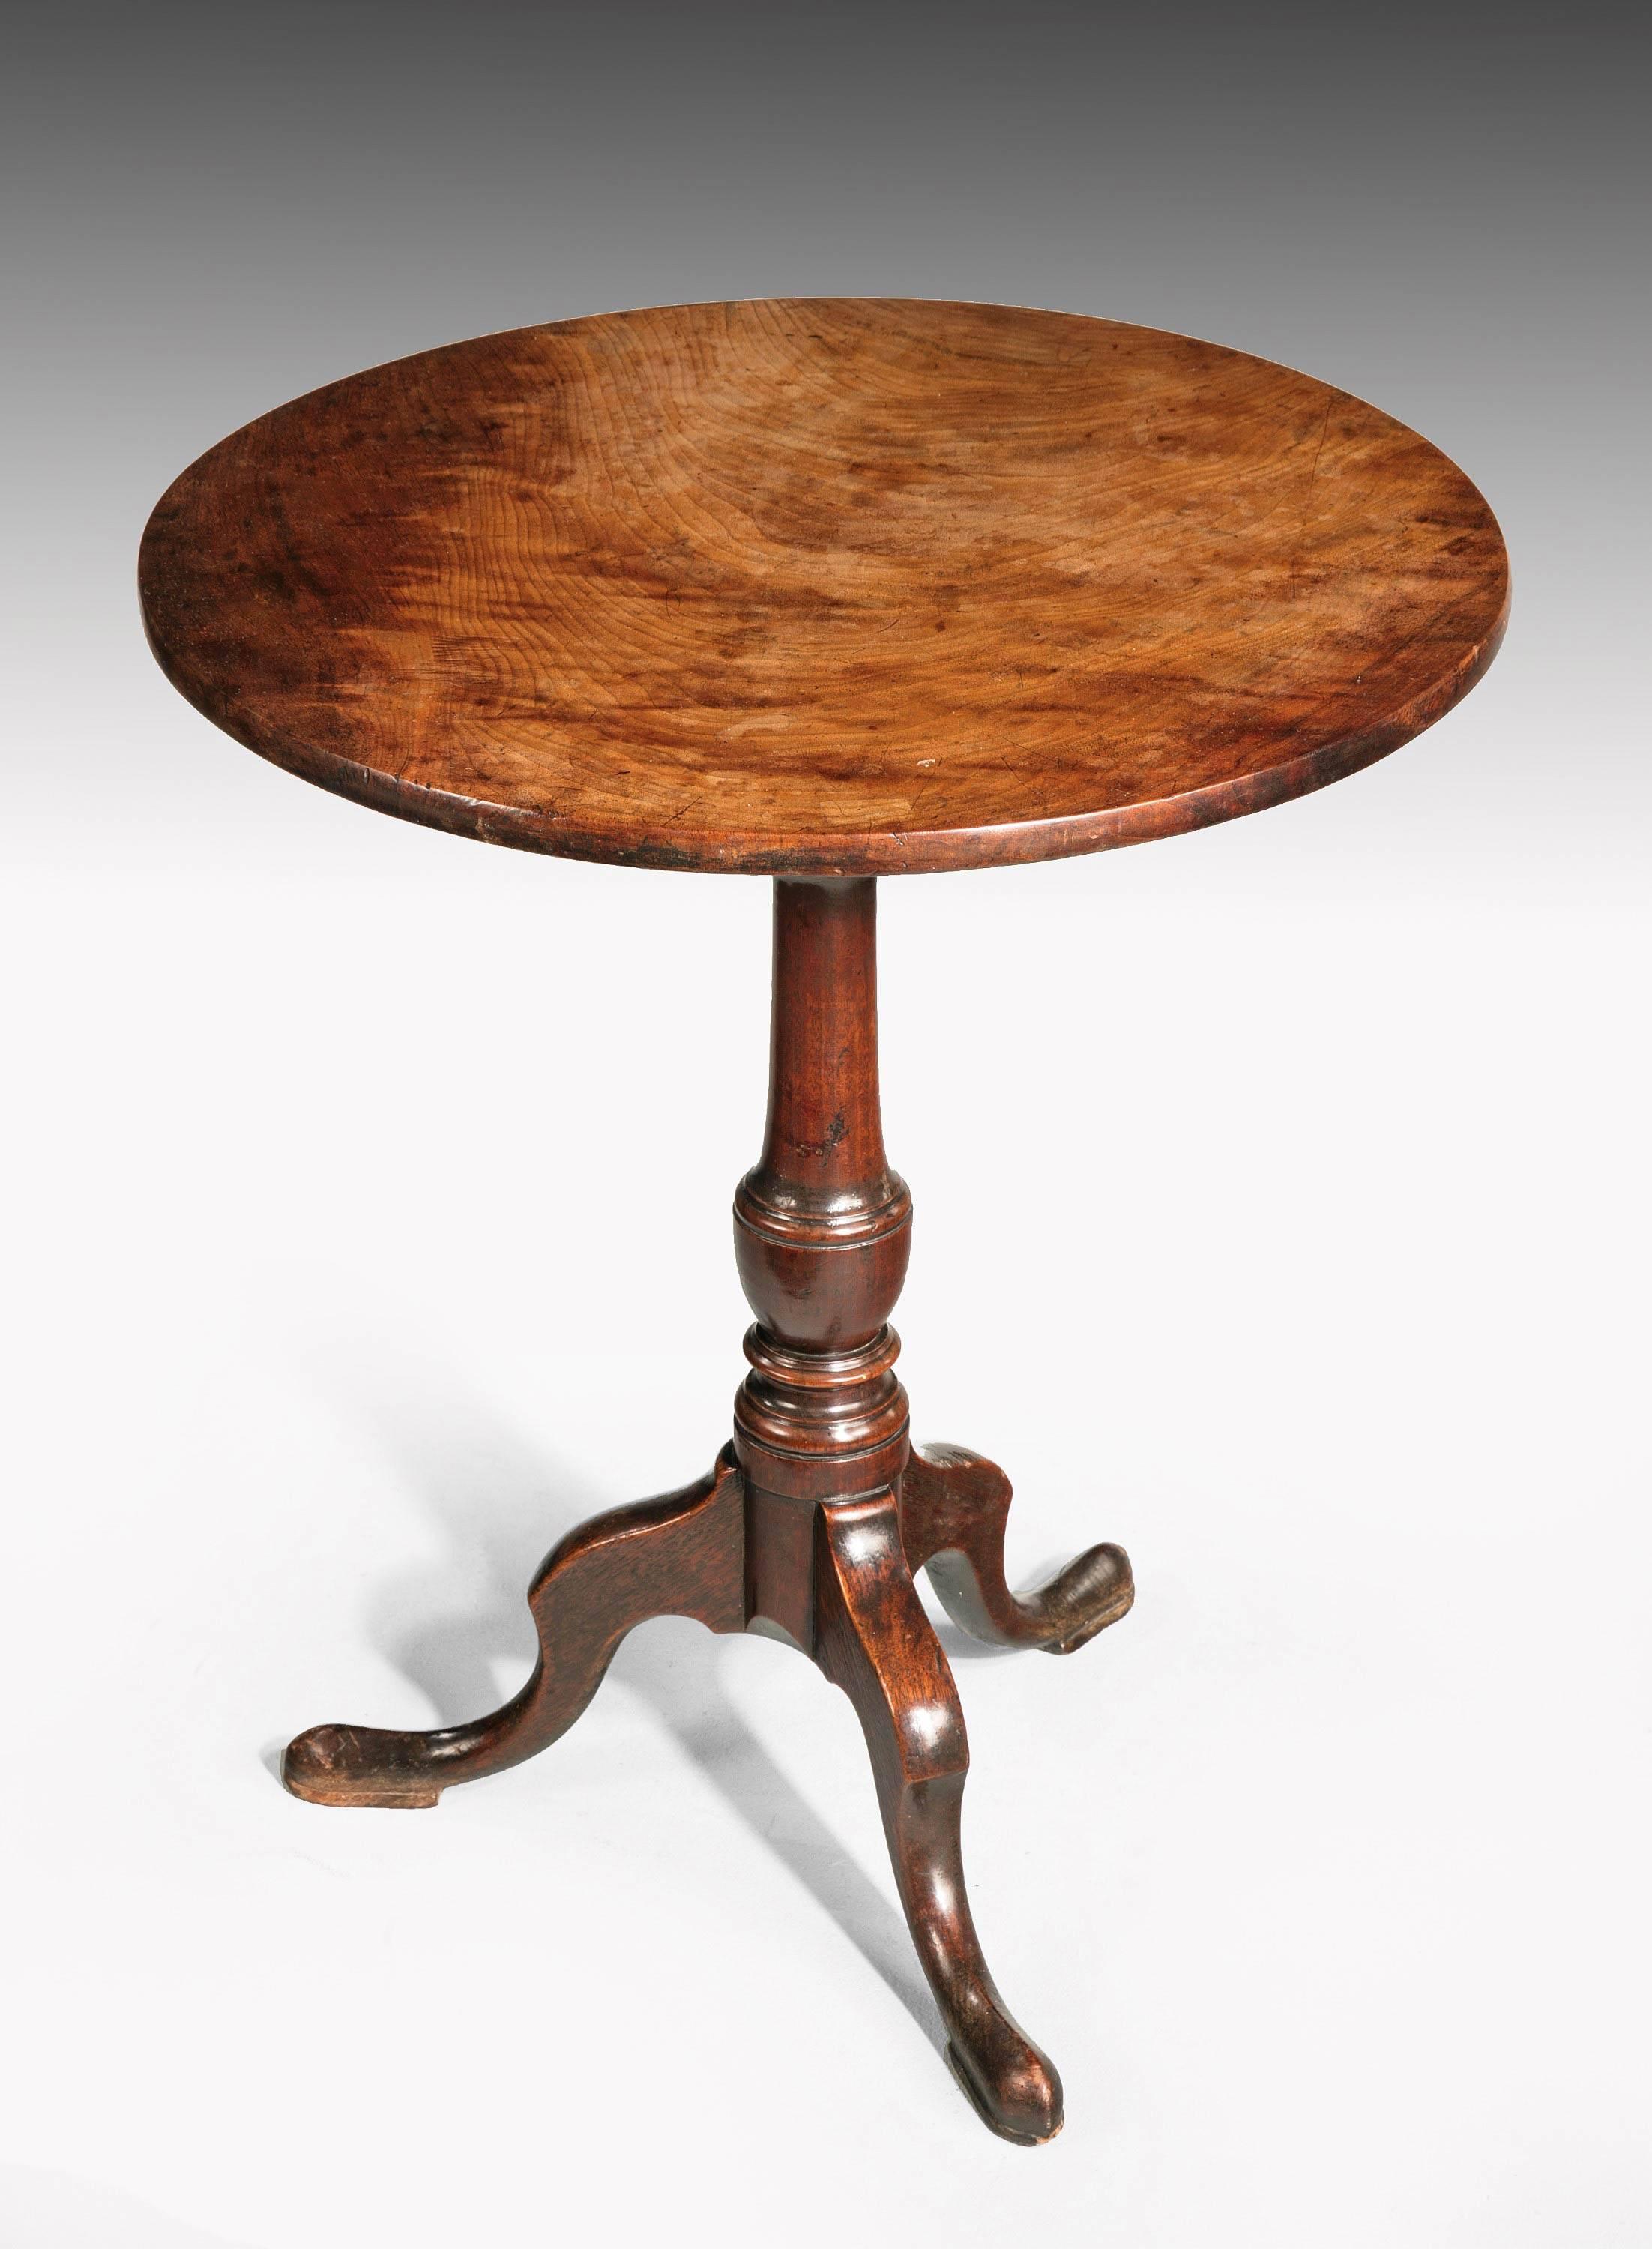 A good George III period mahogany tilt table on a turned central support over pad feet. Excellent colour and patina with original works to the underside.